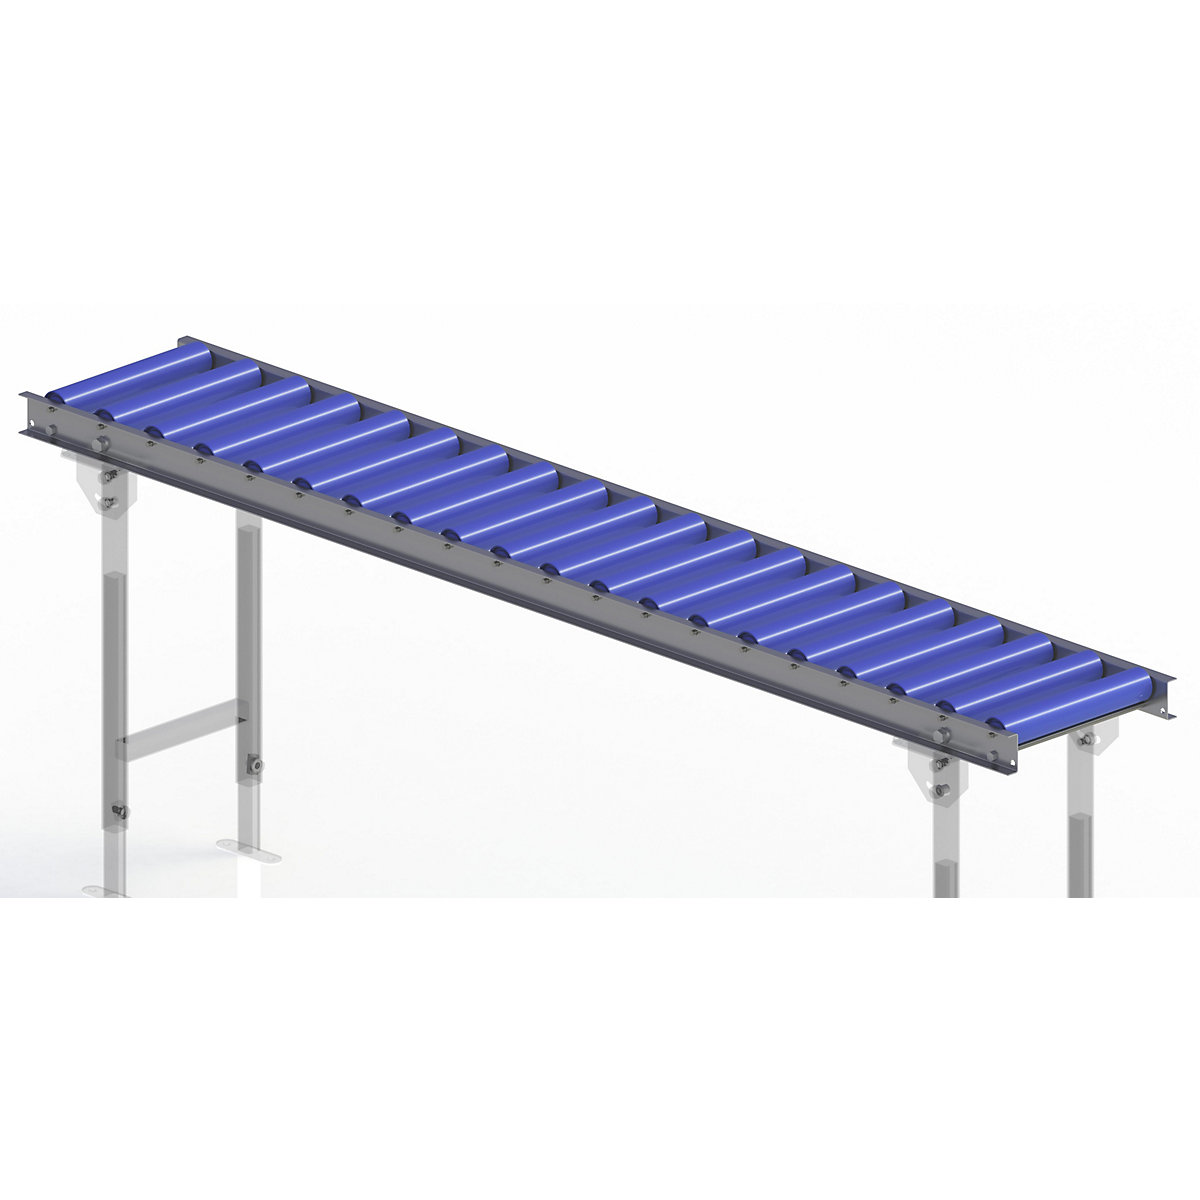 Gura – Light duty roller conveyor, steel frame with plastic rollers, track width 300 mm, axle spacing 100 mm, length 2.0 m